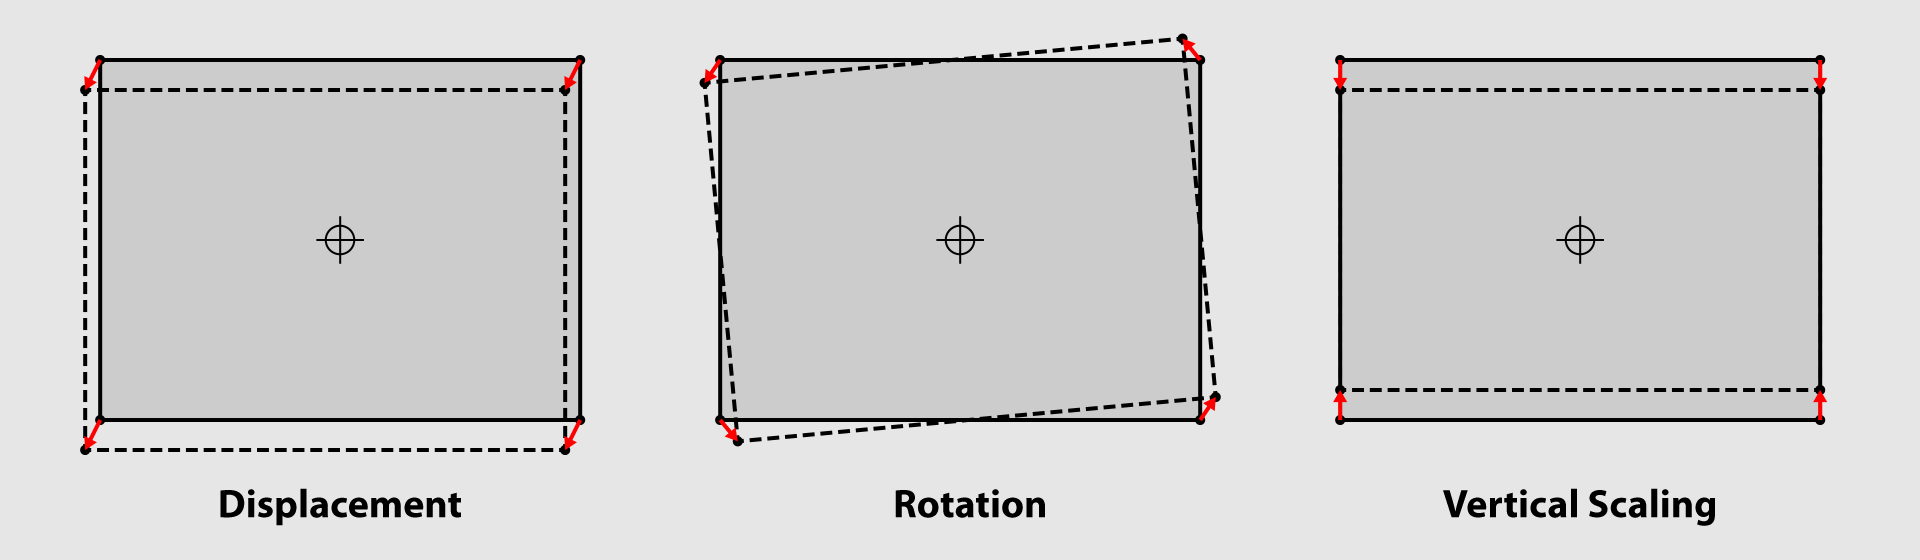 Three kinds of motion shown diagramatically.